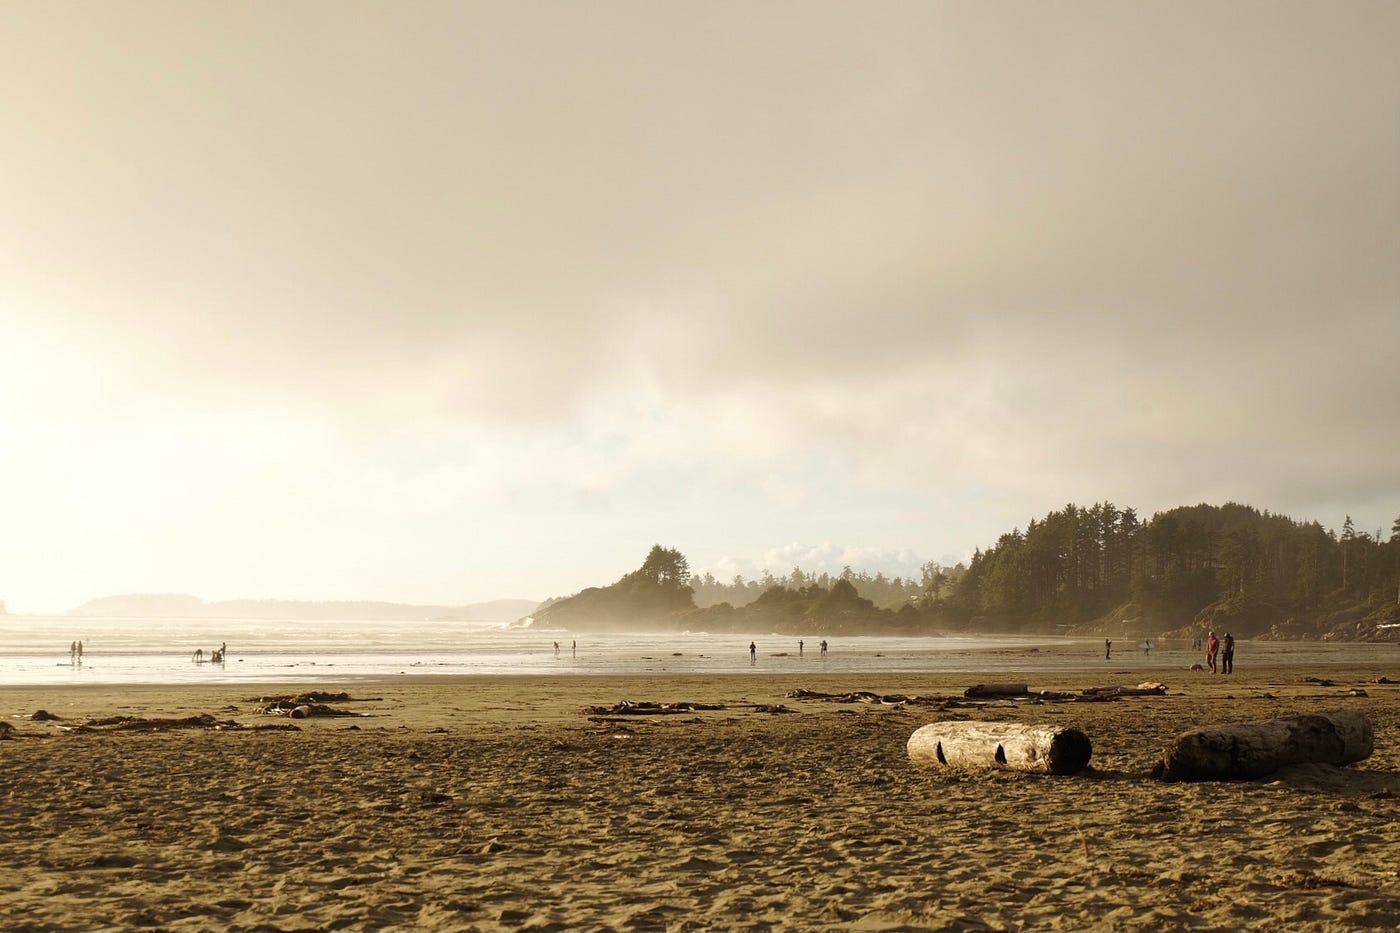 A beach in Tofino at dusk, with people walking in the background.